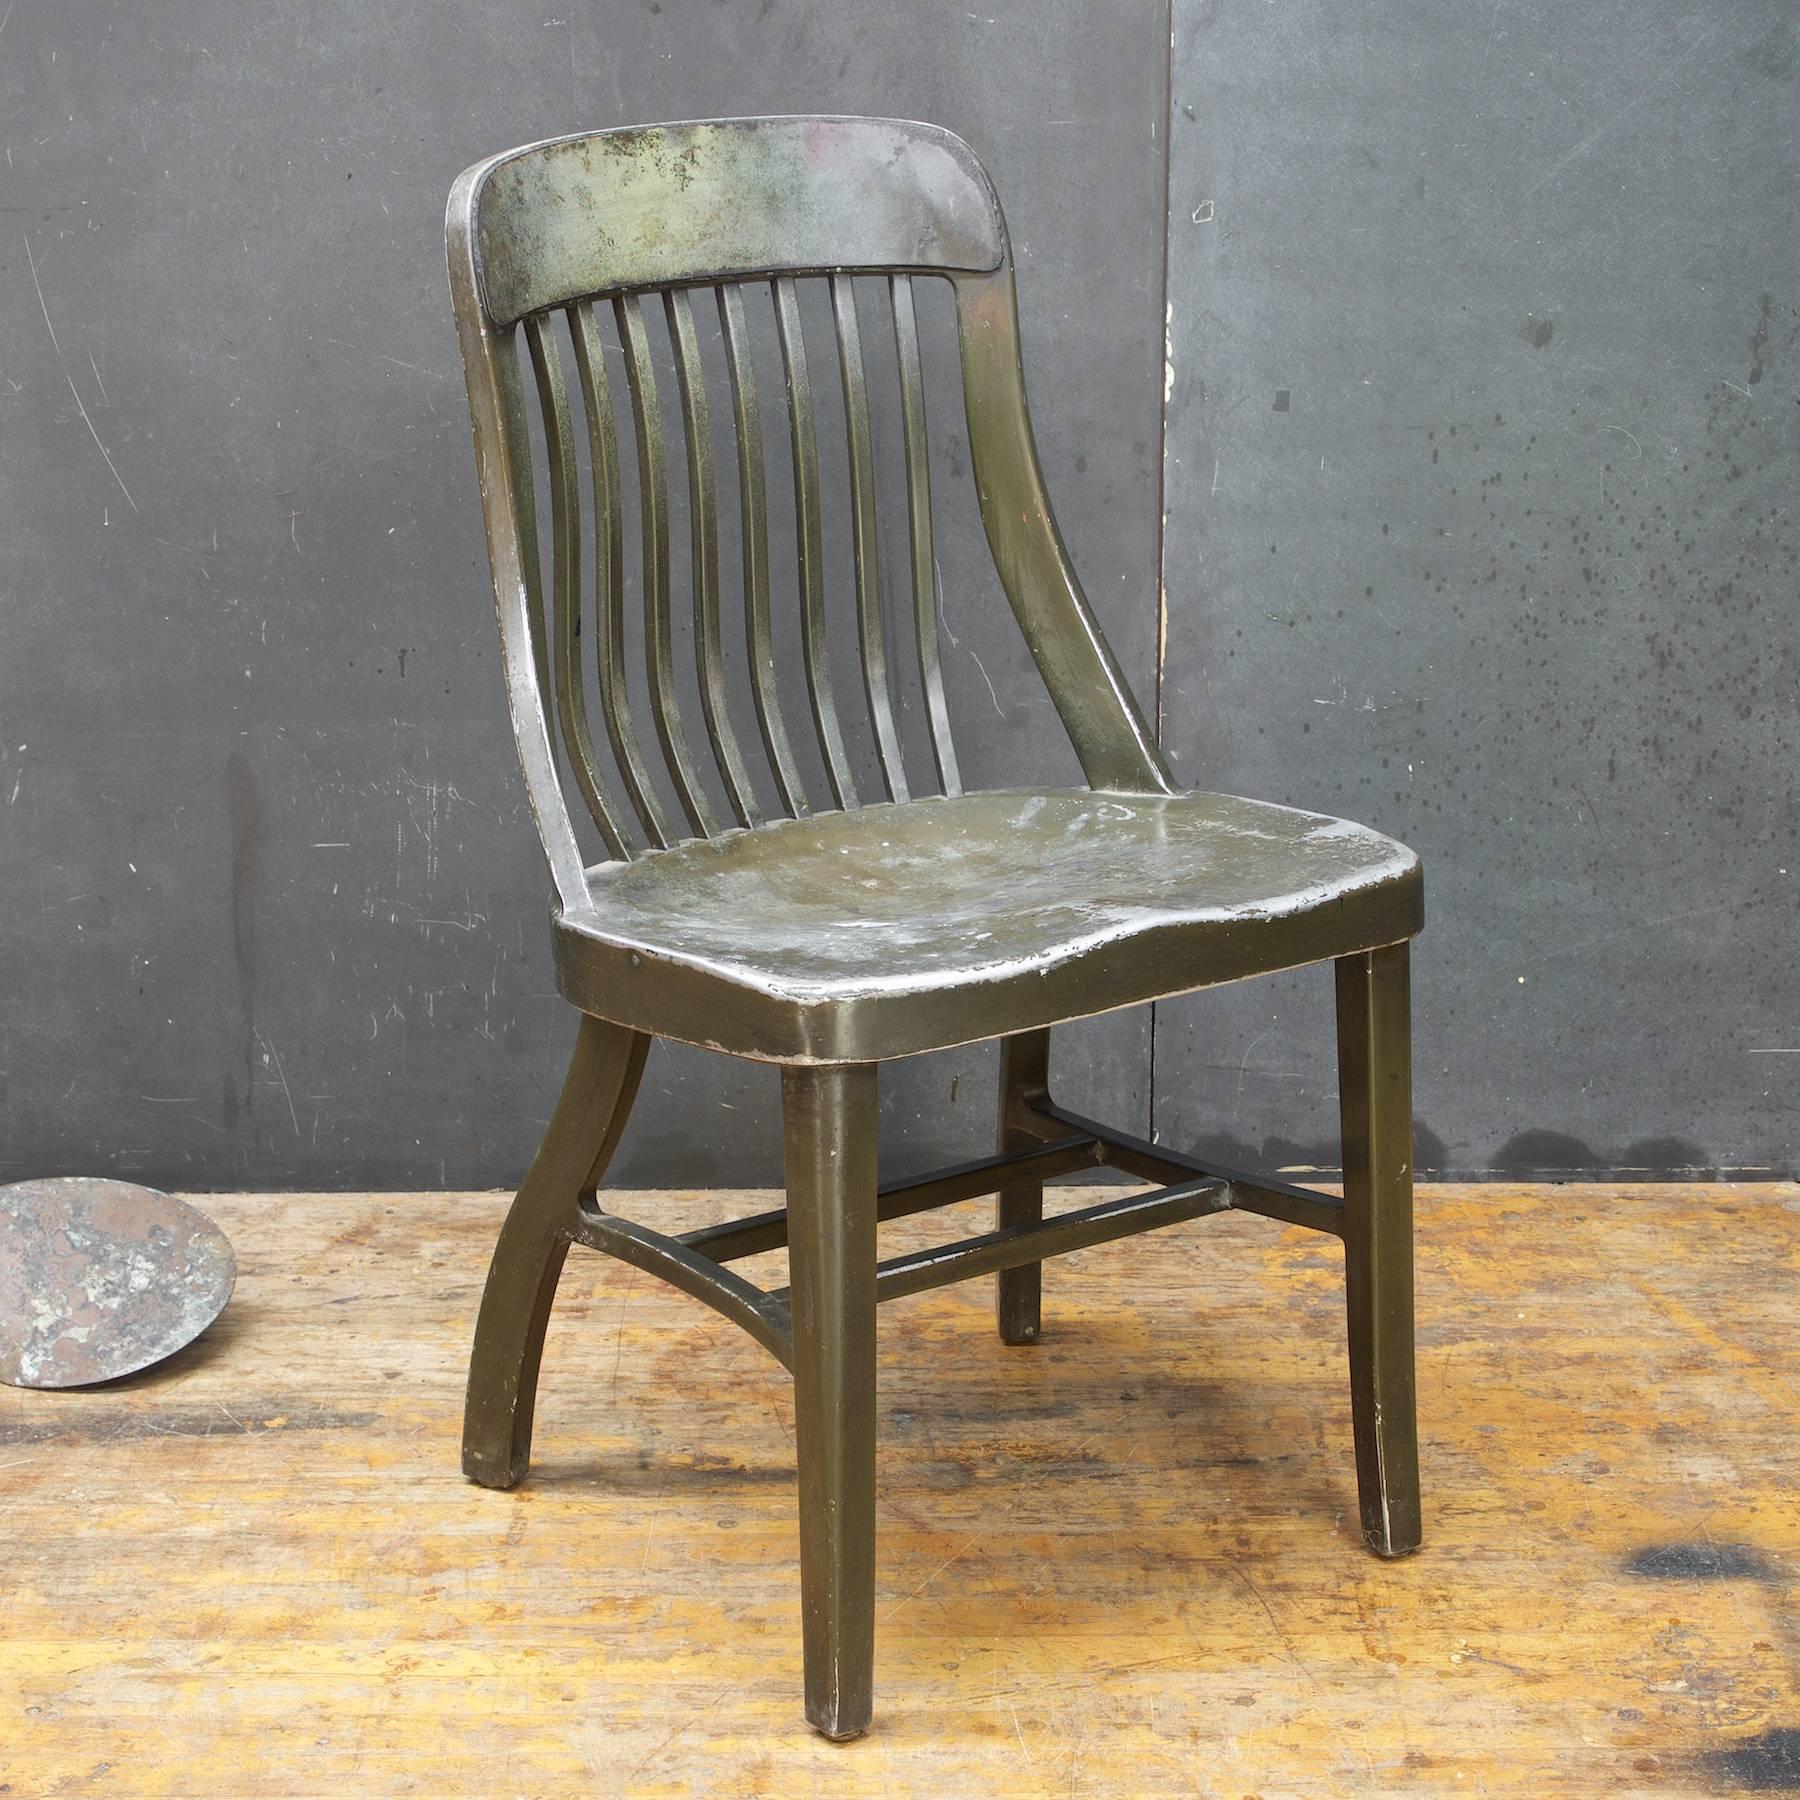 Honest wear and patina.

Measures: W 18.5 x D 19 x Seat H 17.5 x Back H 33 in.